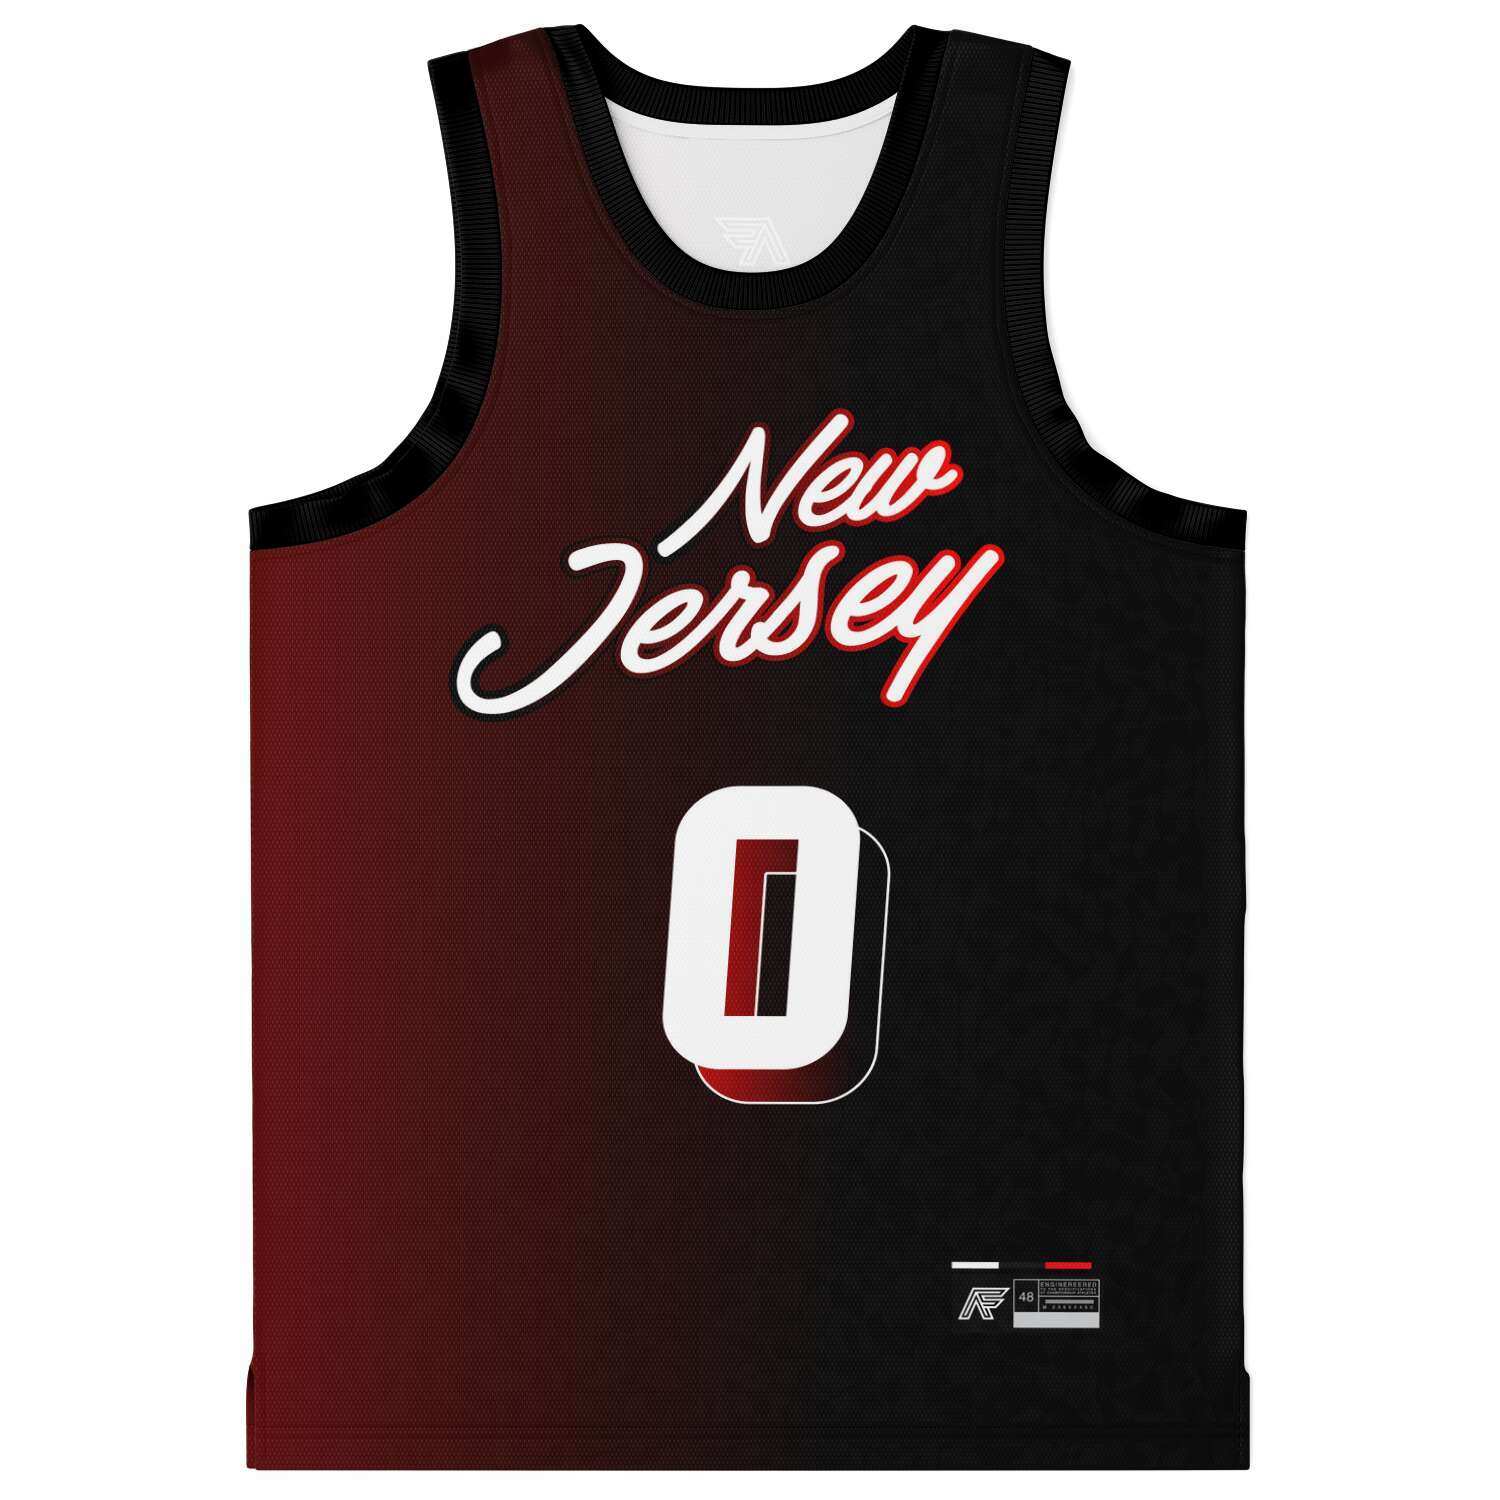 Garden State Jersey (Free Shipping Included)